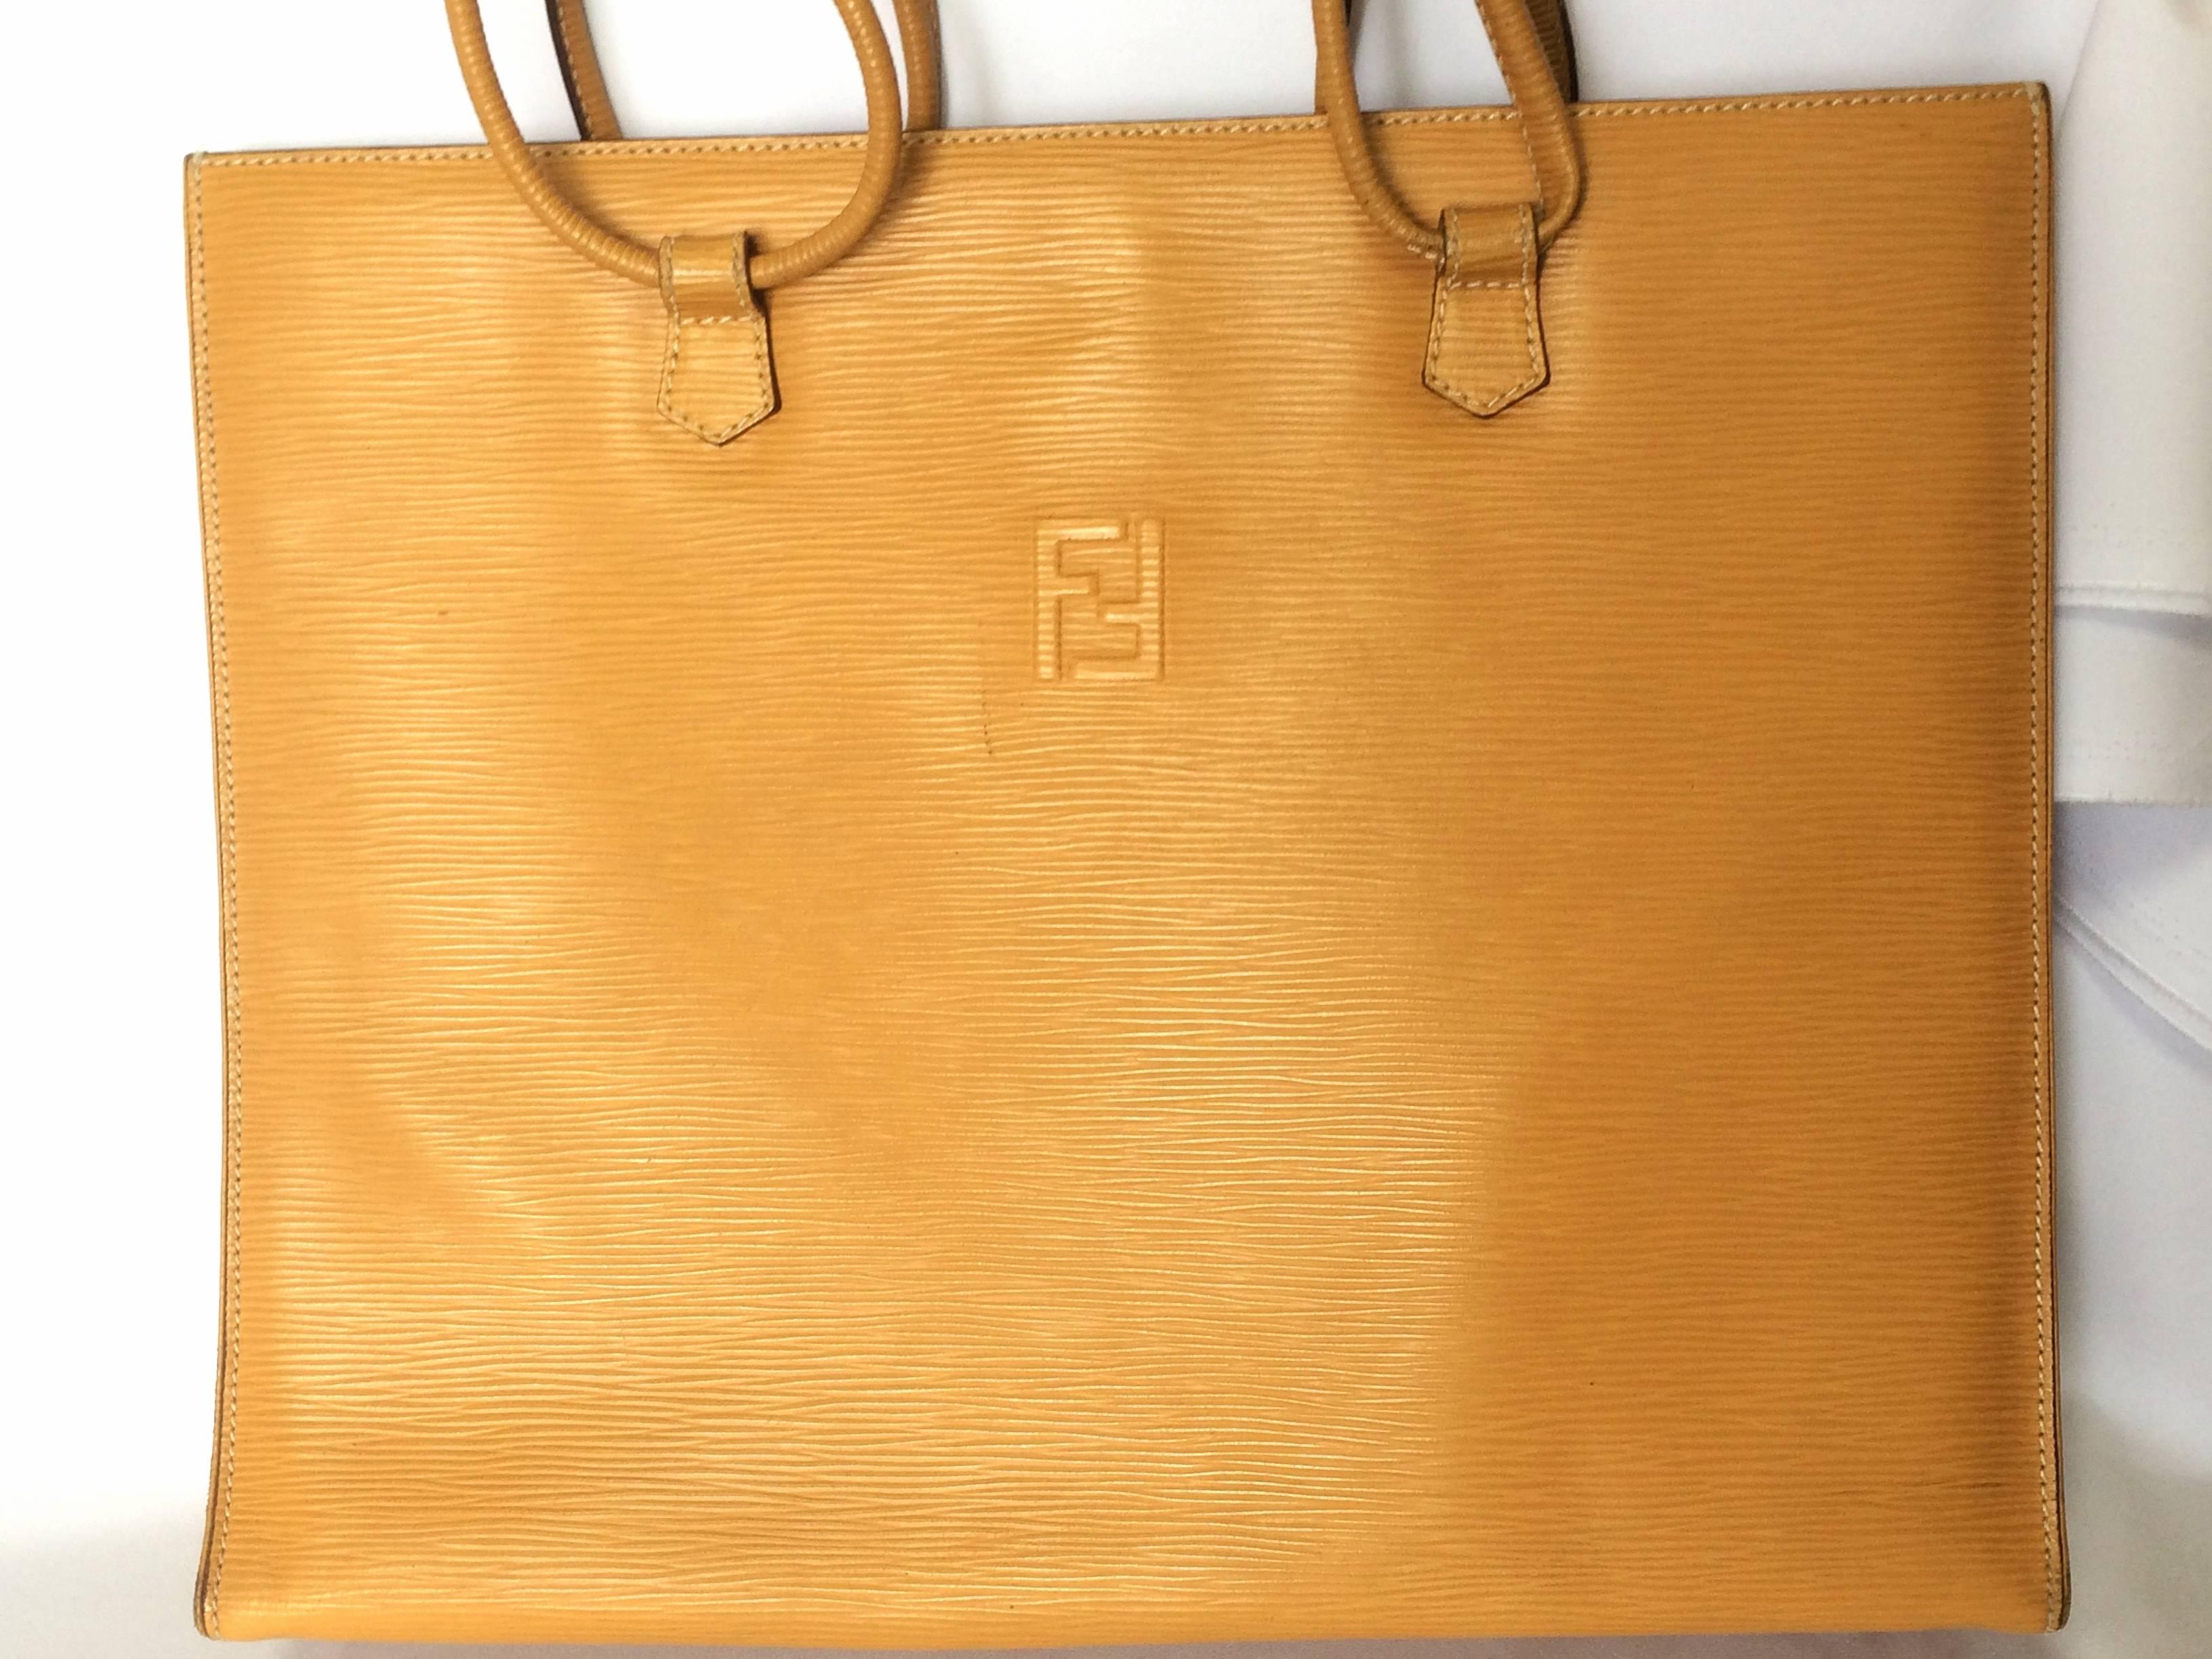 1990s. Vintage FENDI light mustard yellow epi leather extra large shoppers tote bag with logo stitch mark. Rare.

If you are a FENDI vintage collector and lover, then this one will be your must-have piece.

This is a vintage one-of-a-kind piece